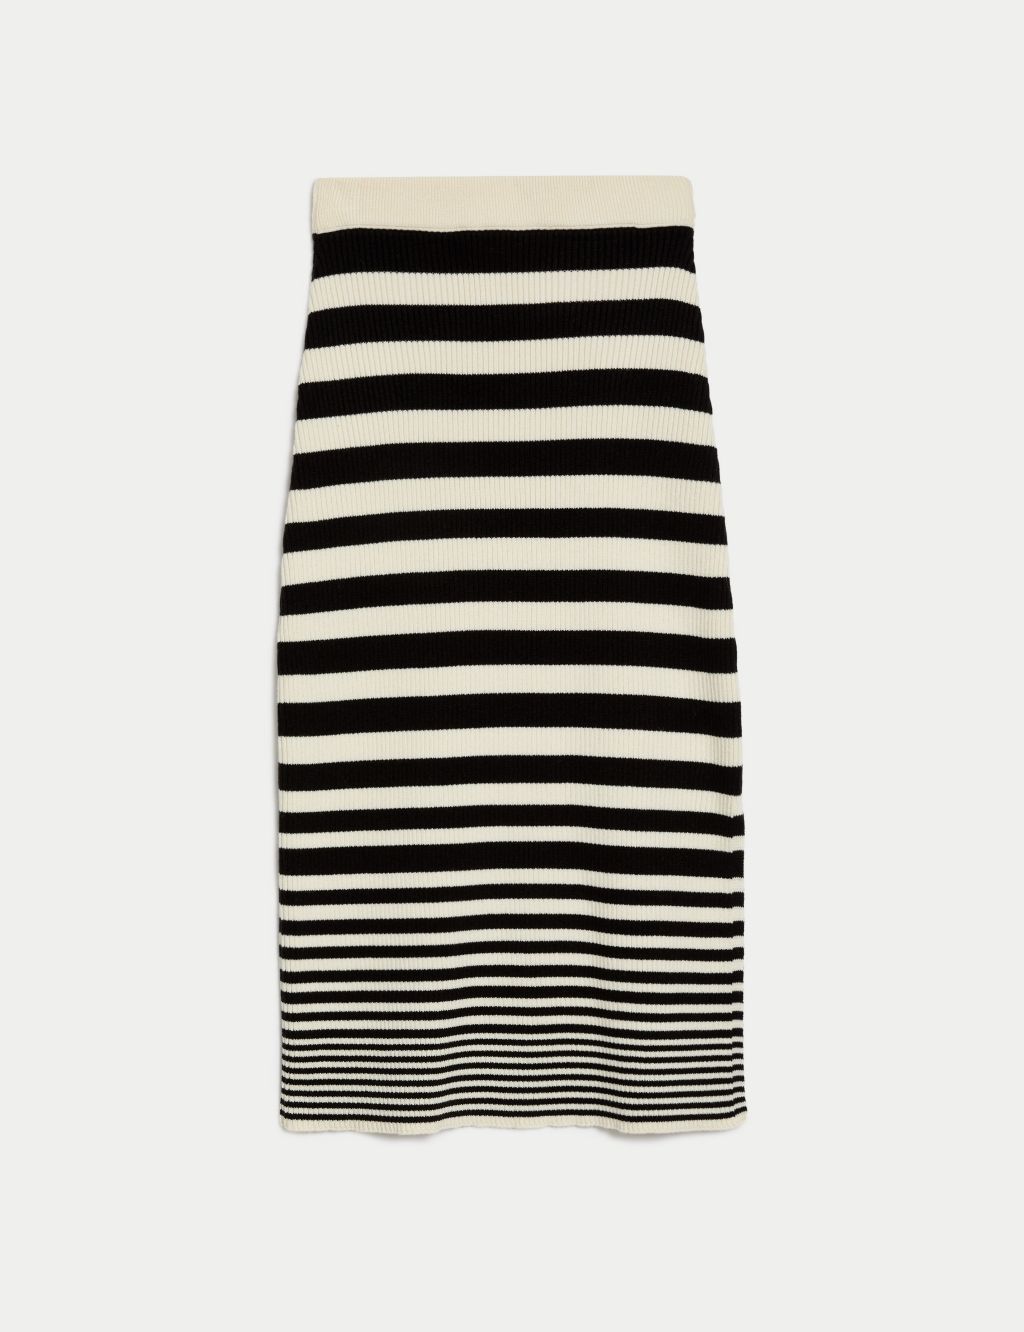 Soft Touch Striped Knitted Midi Skirt image 2